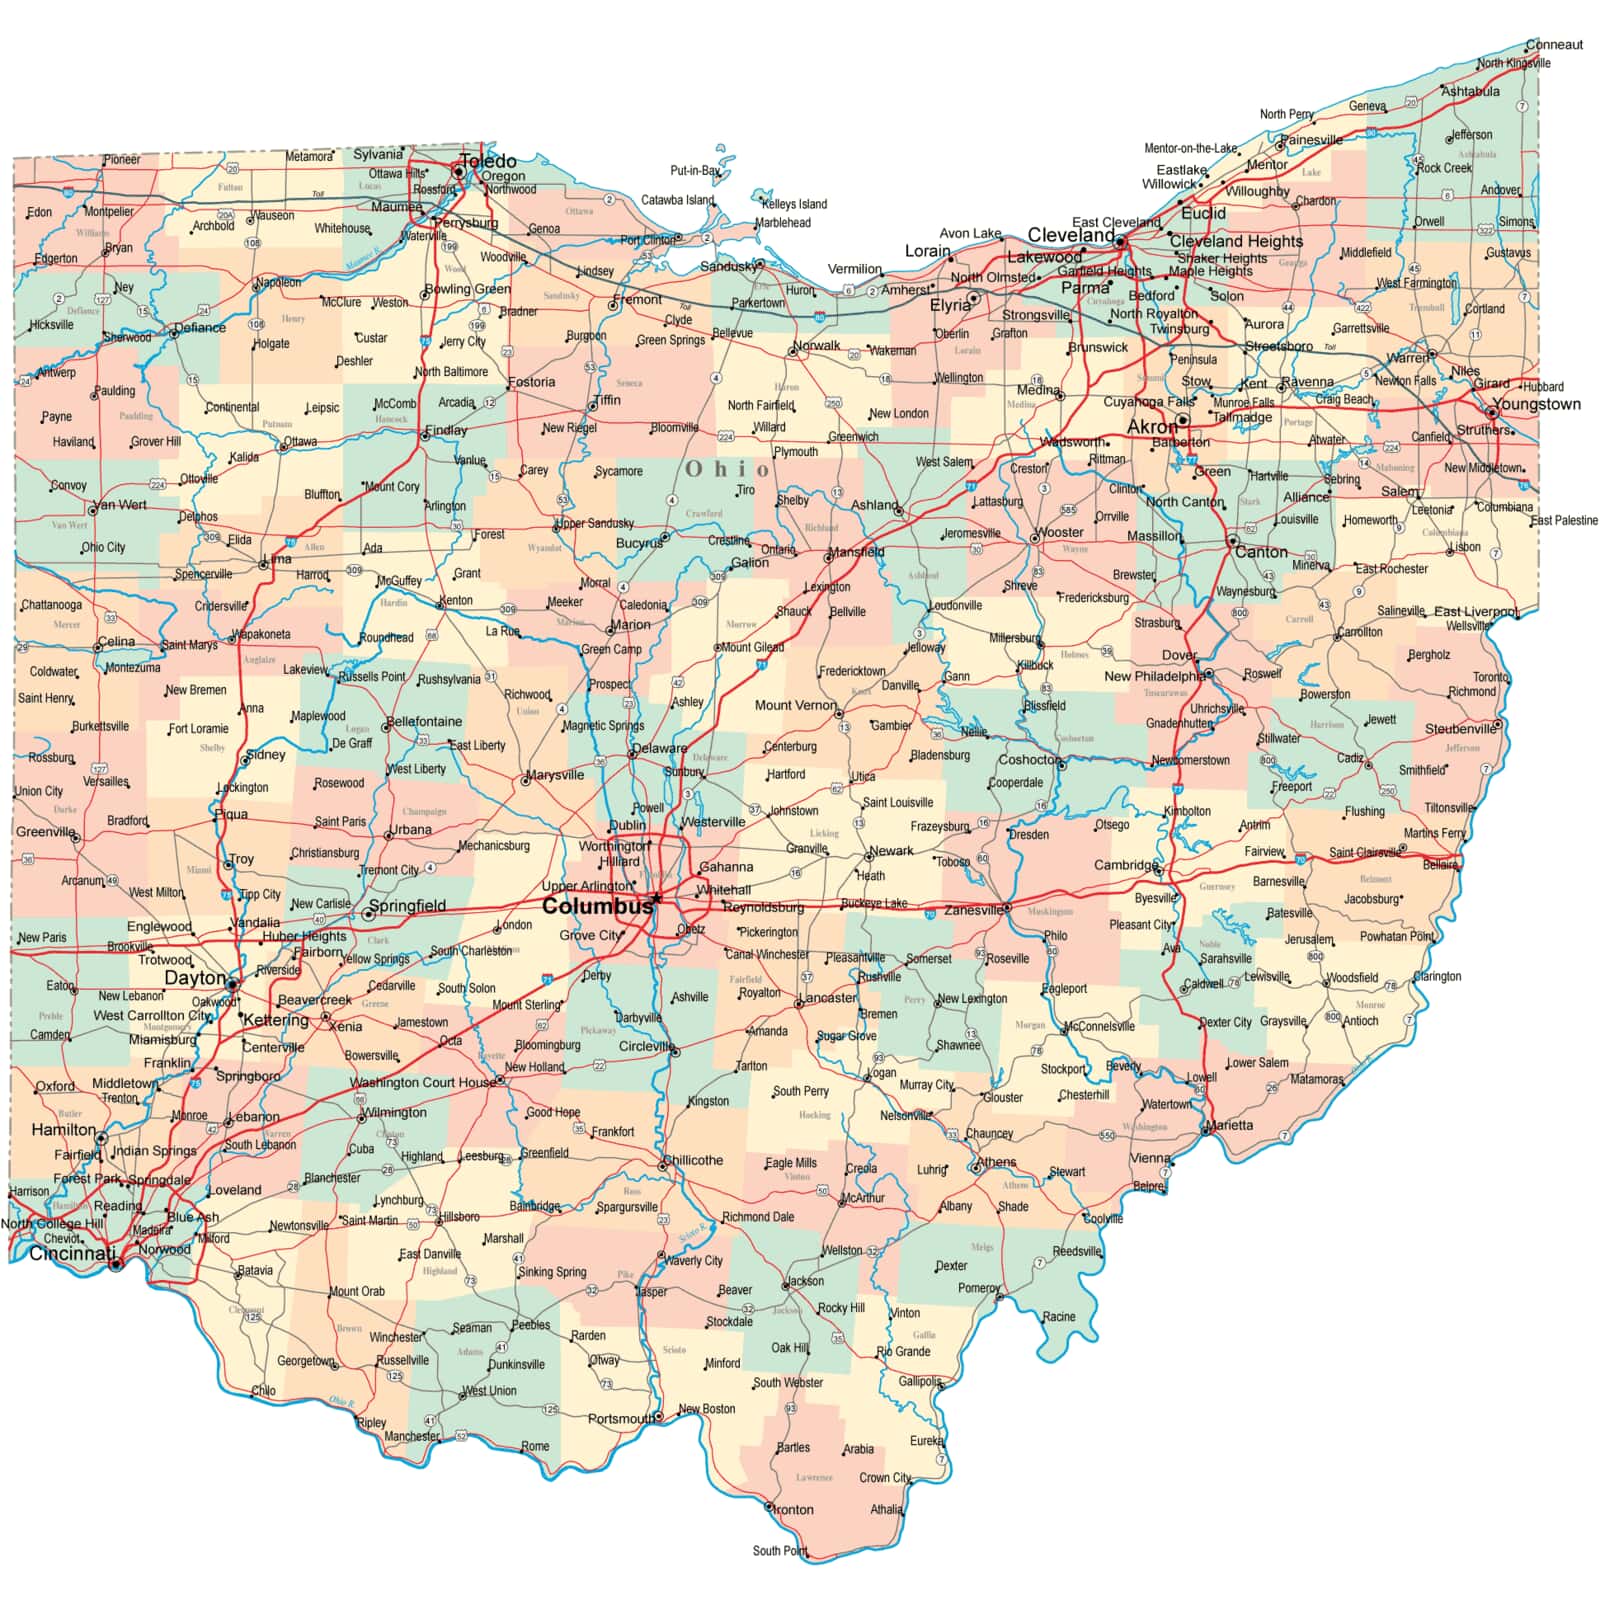 Map Of Ohio Counties With Roads Ohio Road Map   OH Road Map   Ohio Roads and Highways